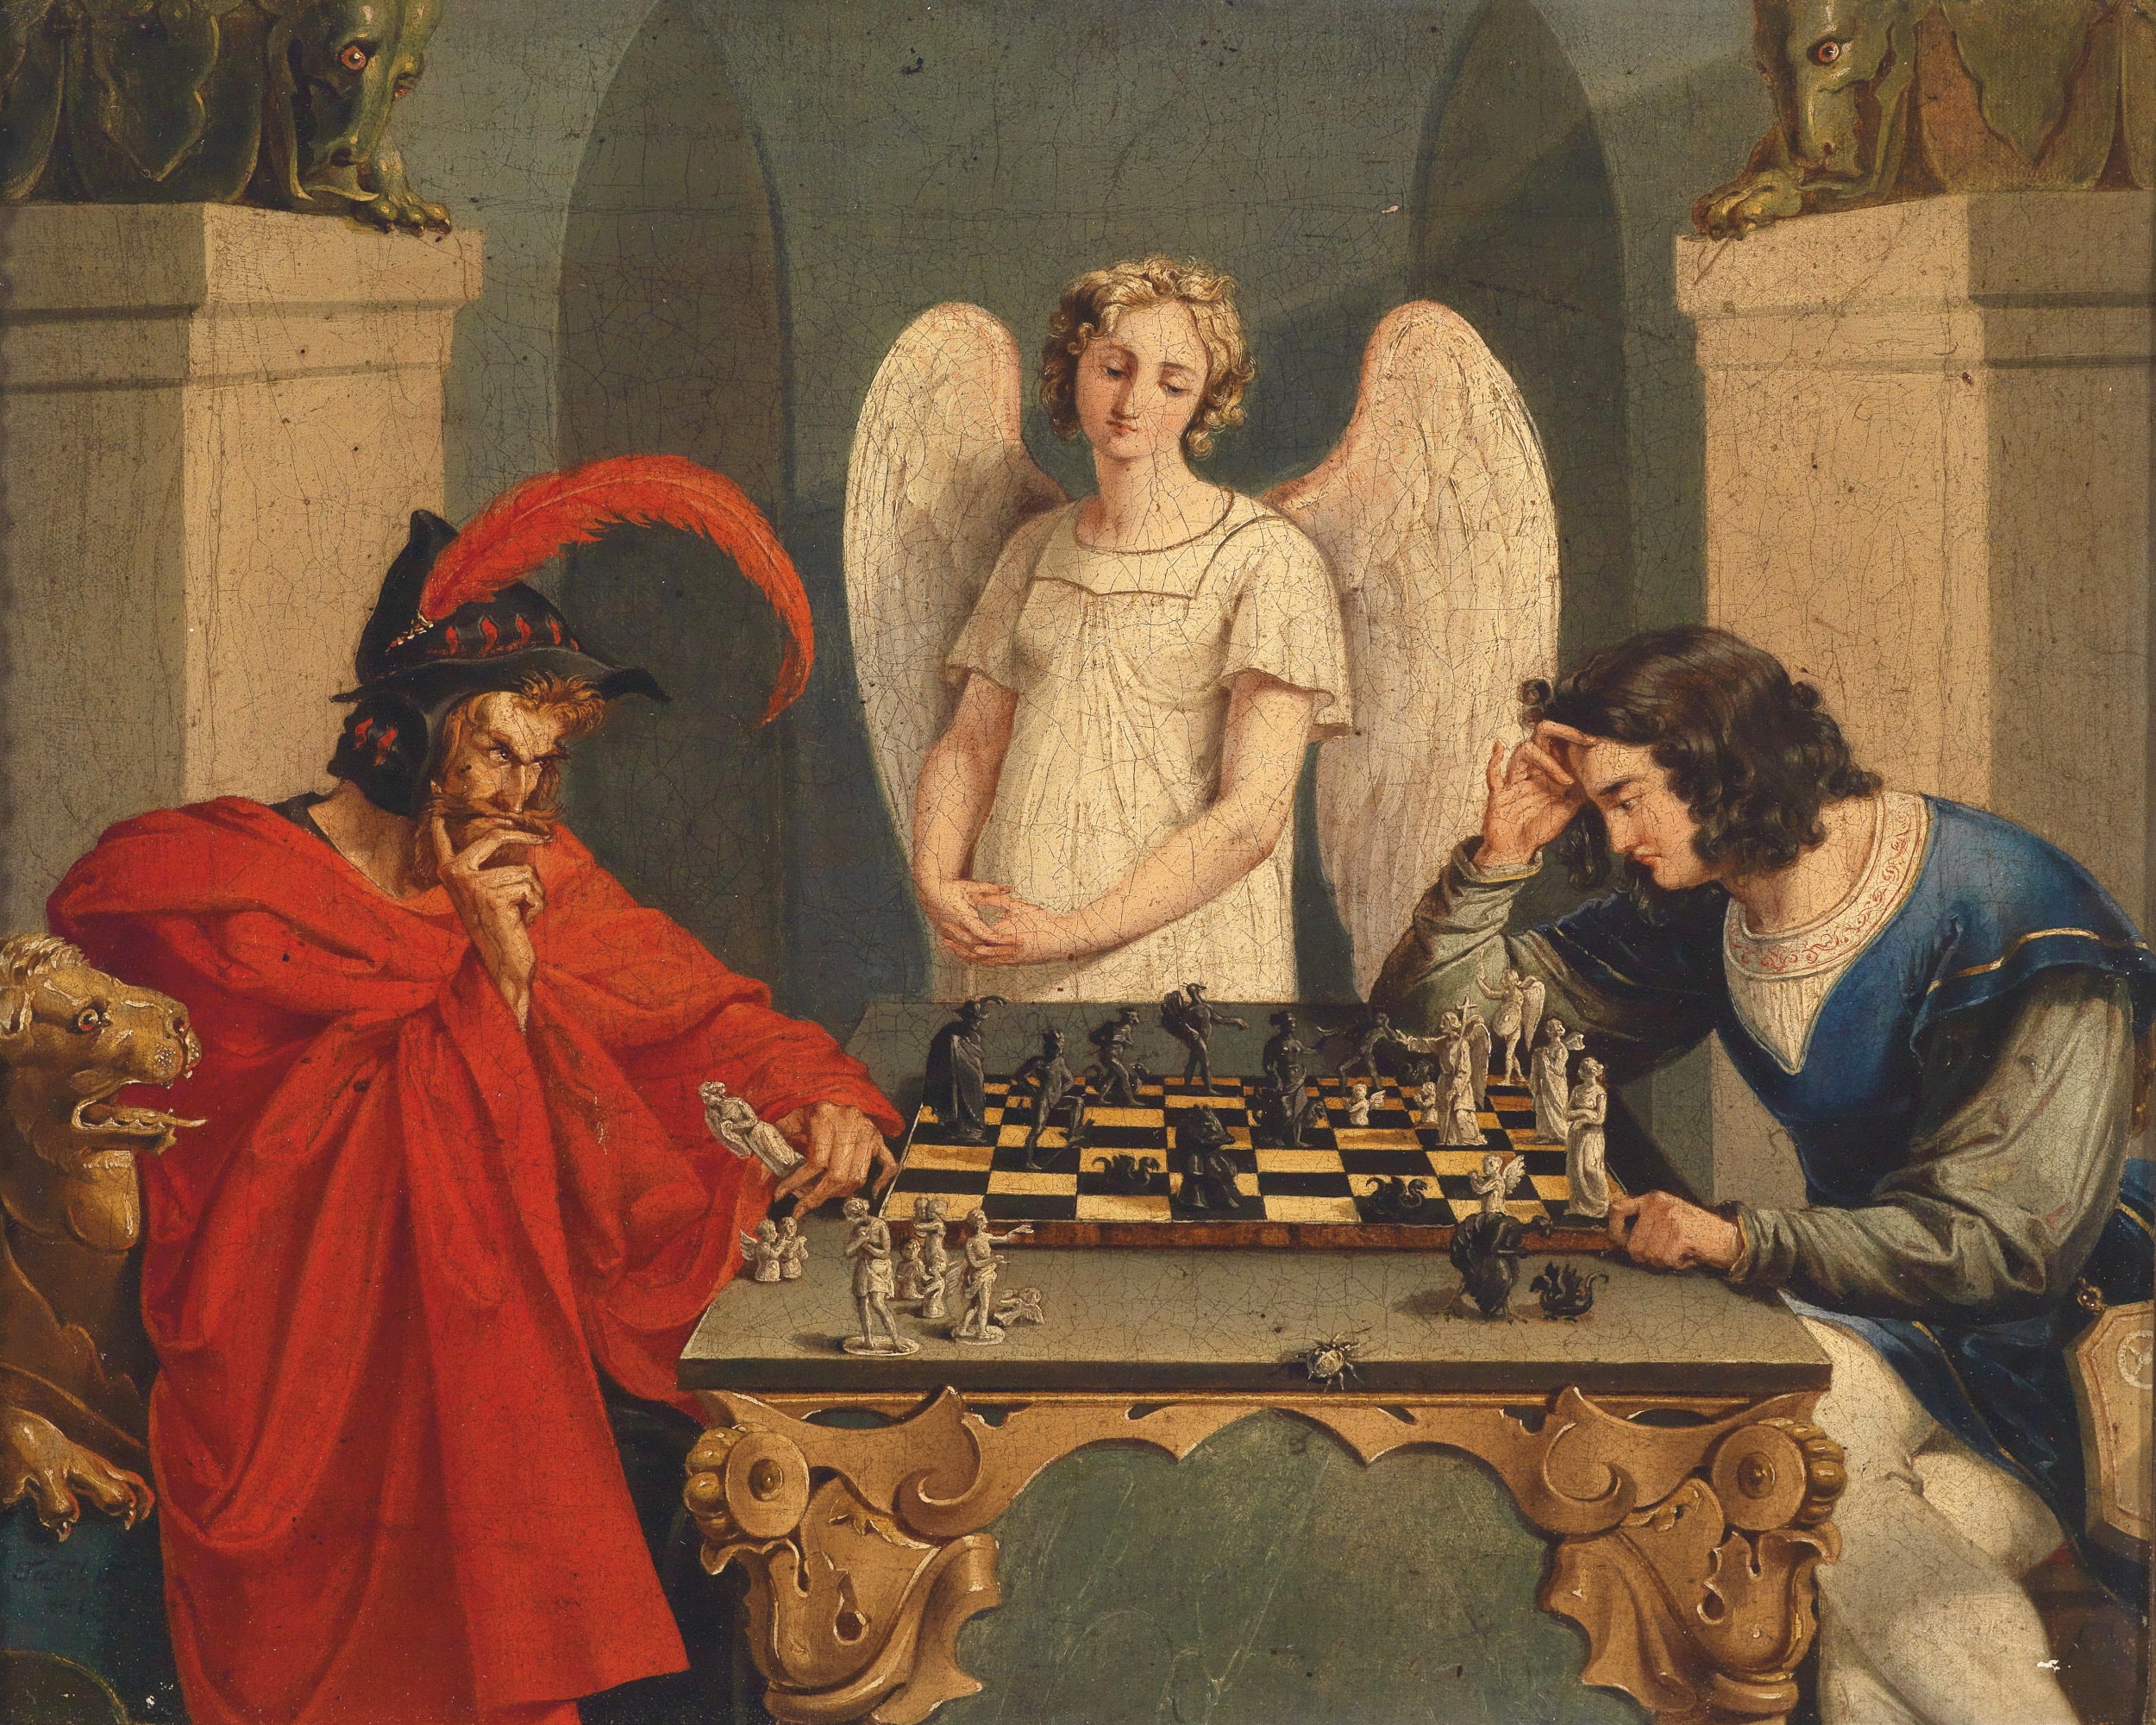 Vintage Print After the Famous Painting chess Game 